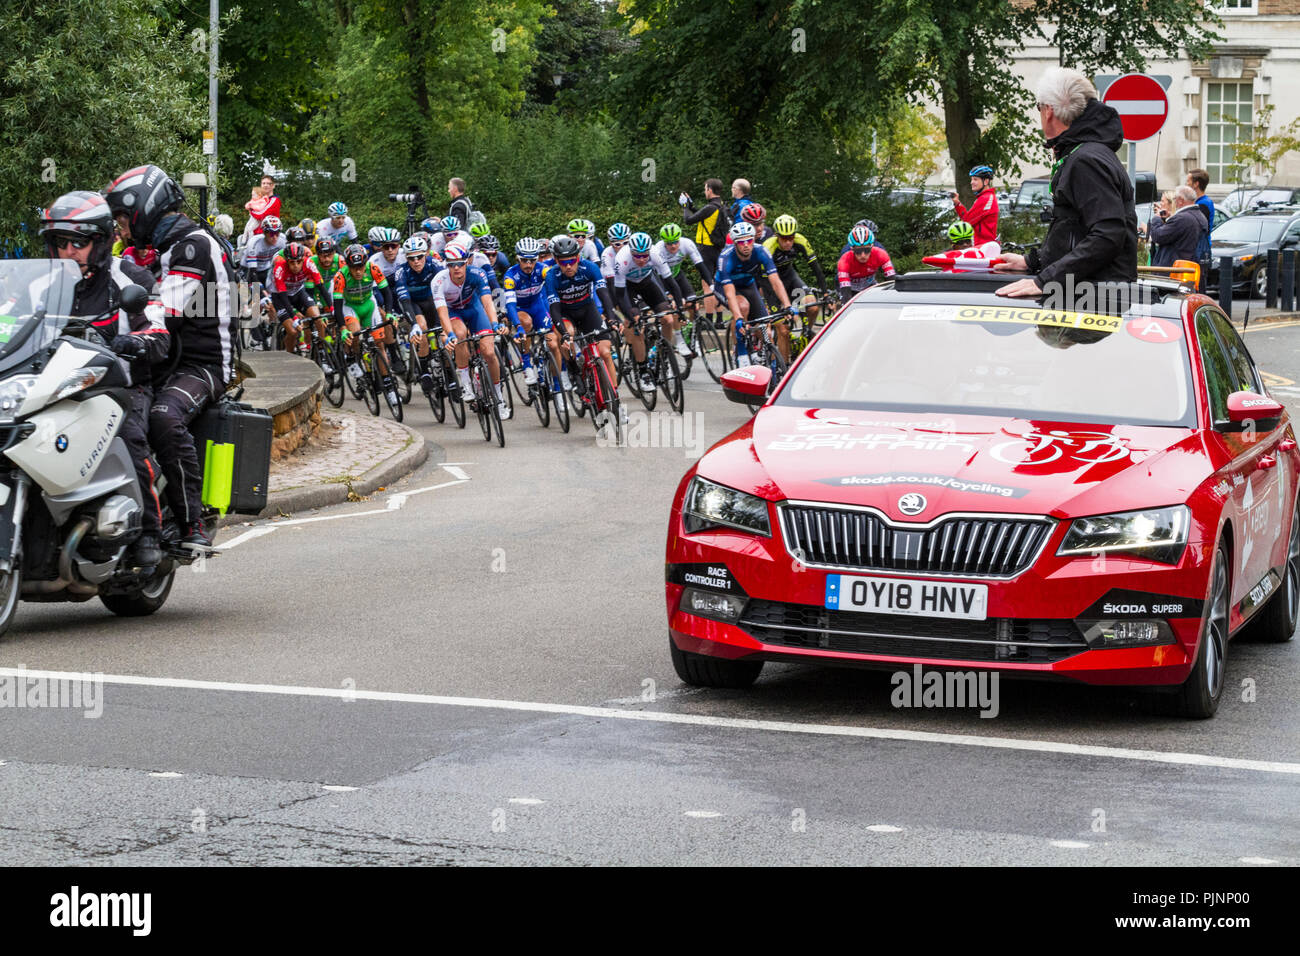 West Bridgford, Nottingham, UK. 8th September 2018. The Tour of Britain passing through West Bridgford, Nottingham, just after the start of the cycle race.  Credit: Martyn Williams/Alamy Live News Stock Photo